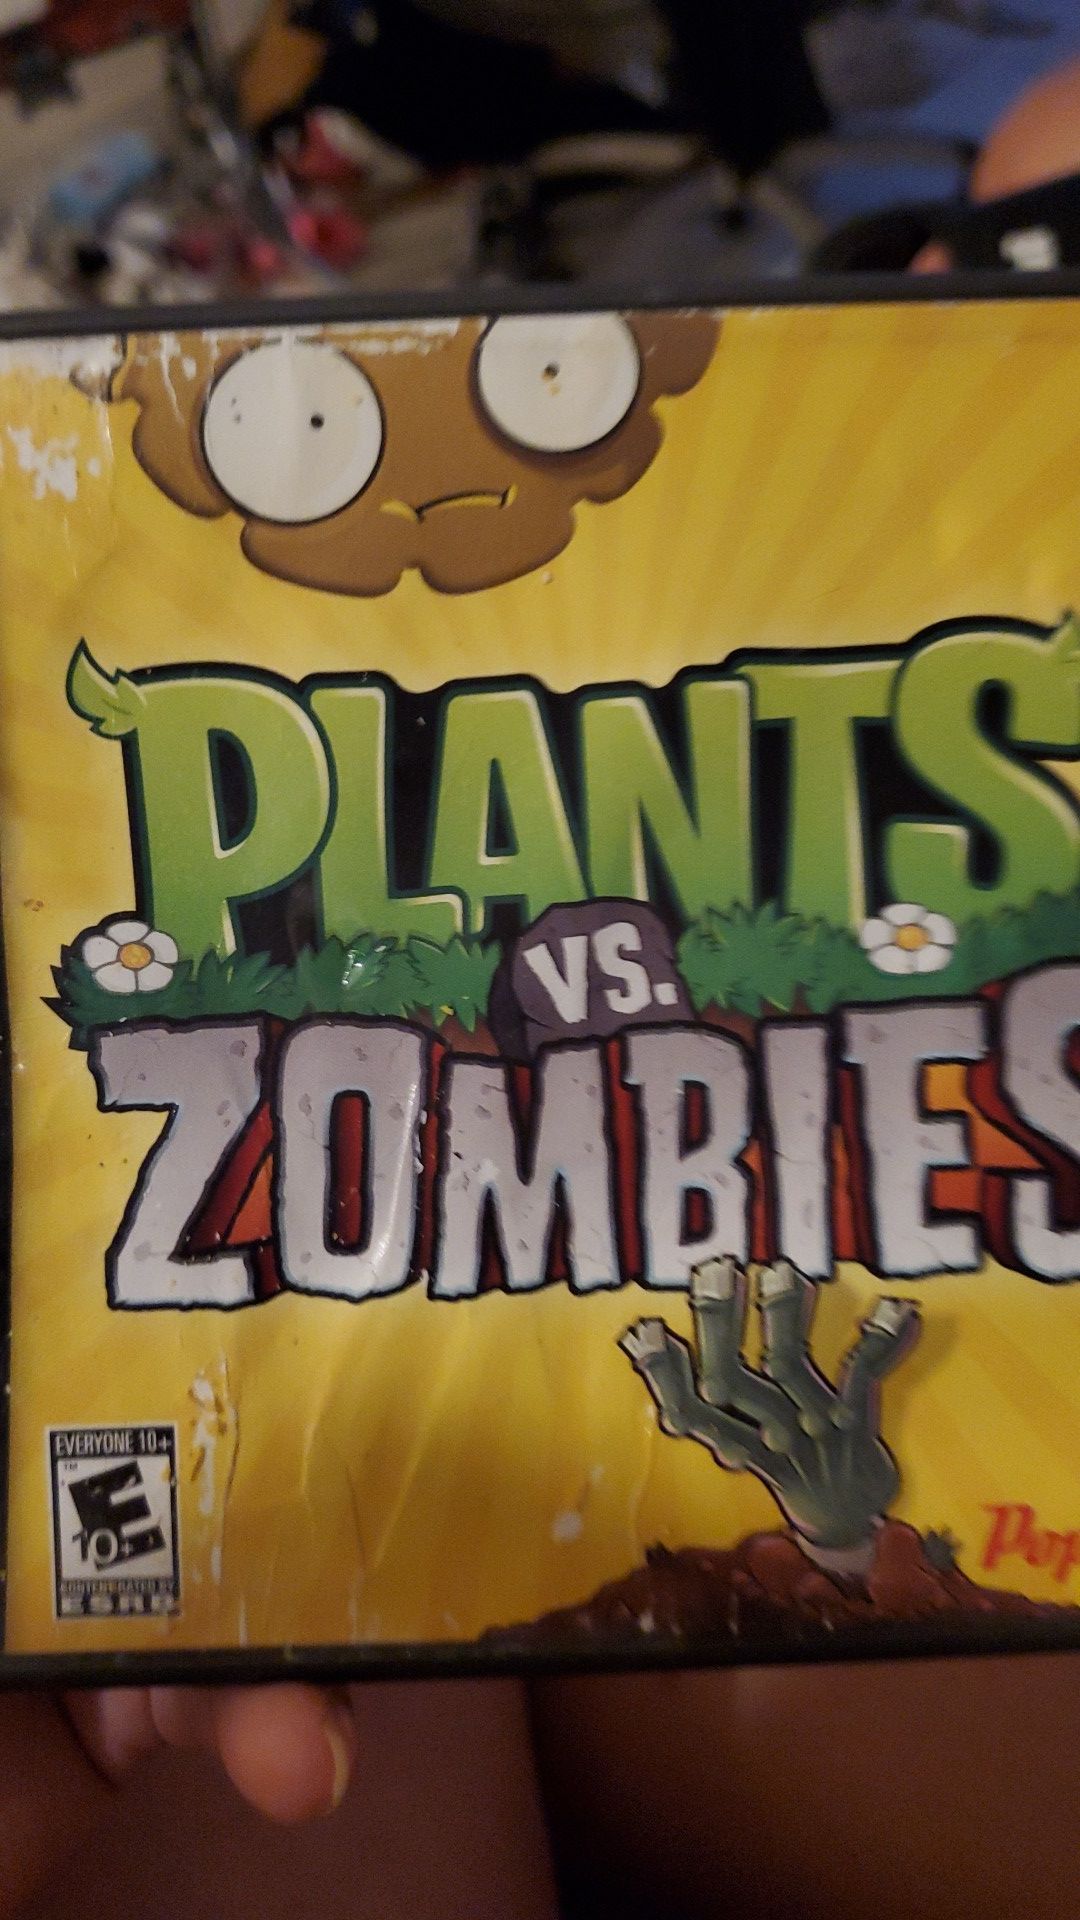 Planet vs zombies for 3ds